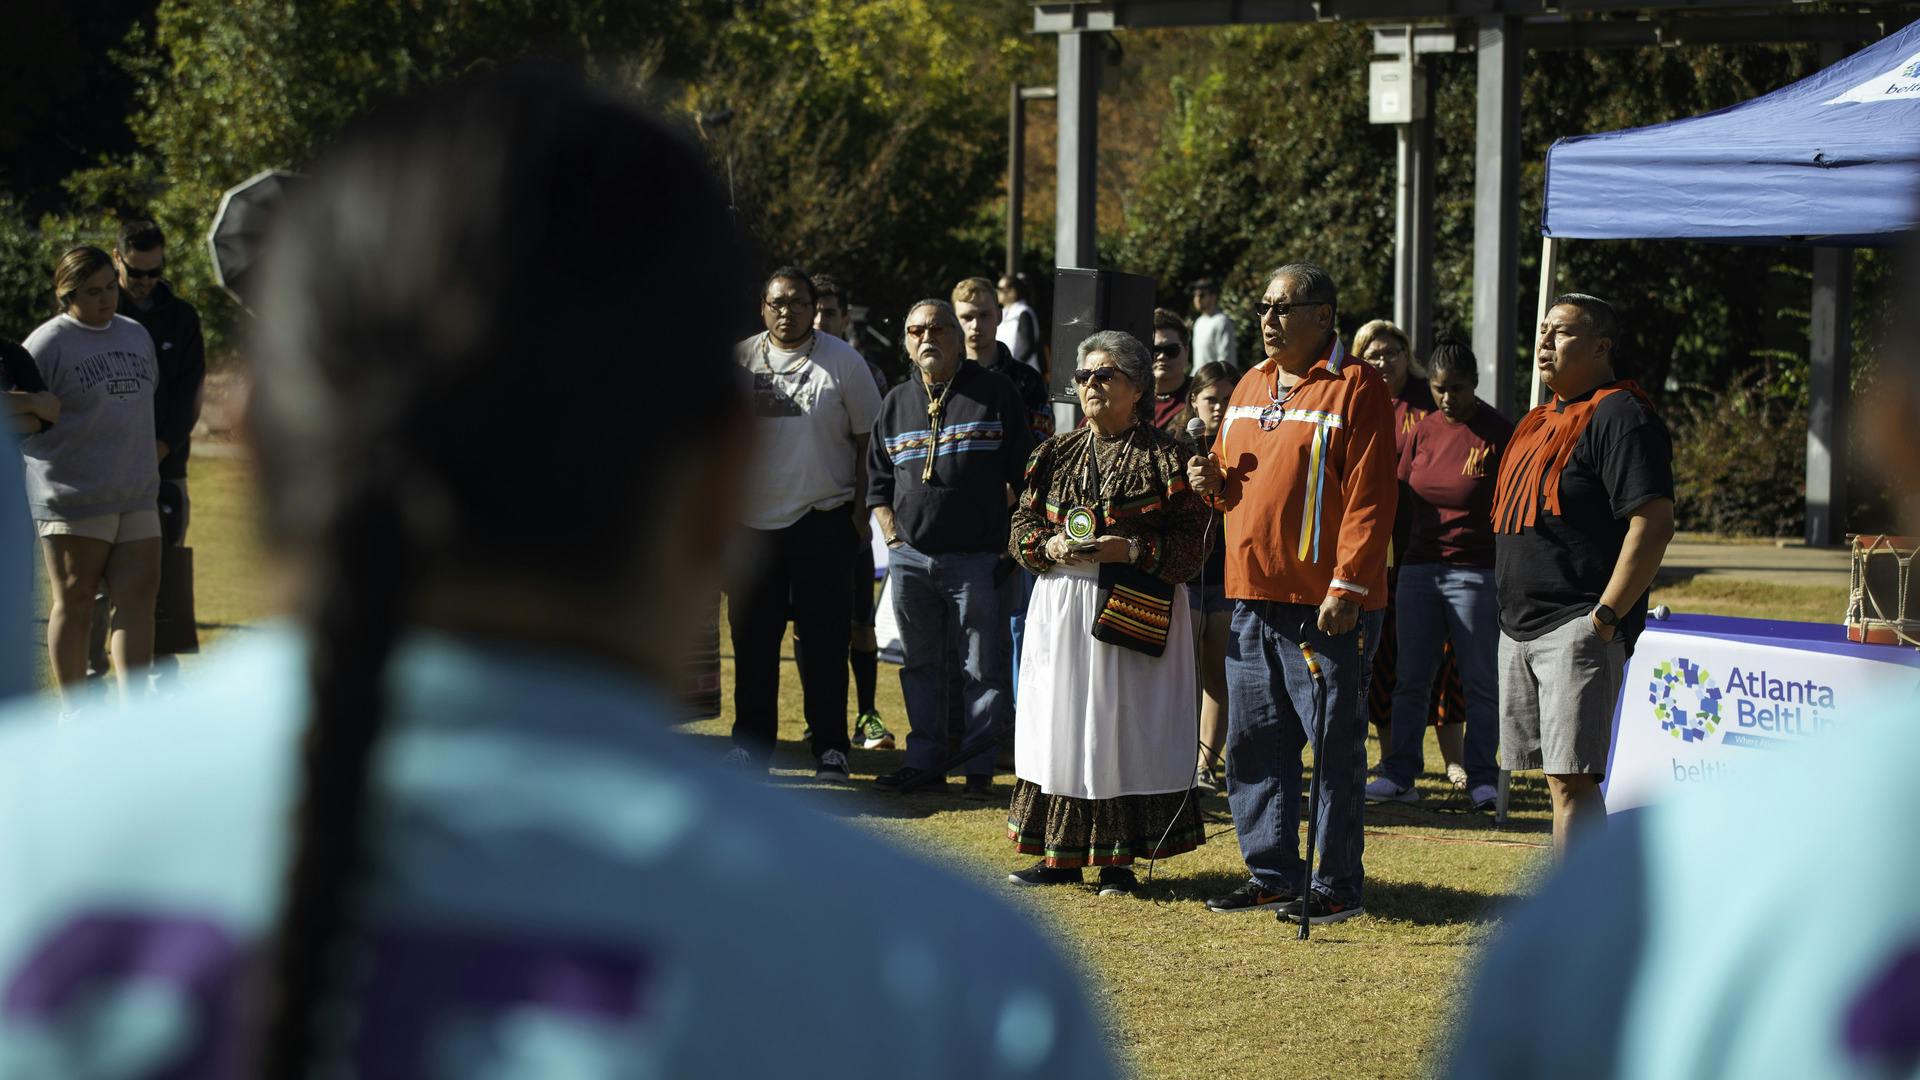 People look on as two members of the Muscogee Nation lead an opening ceremony.